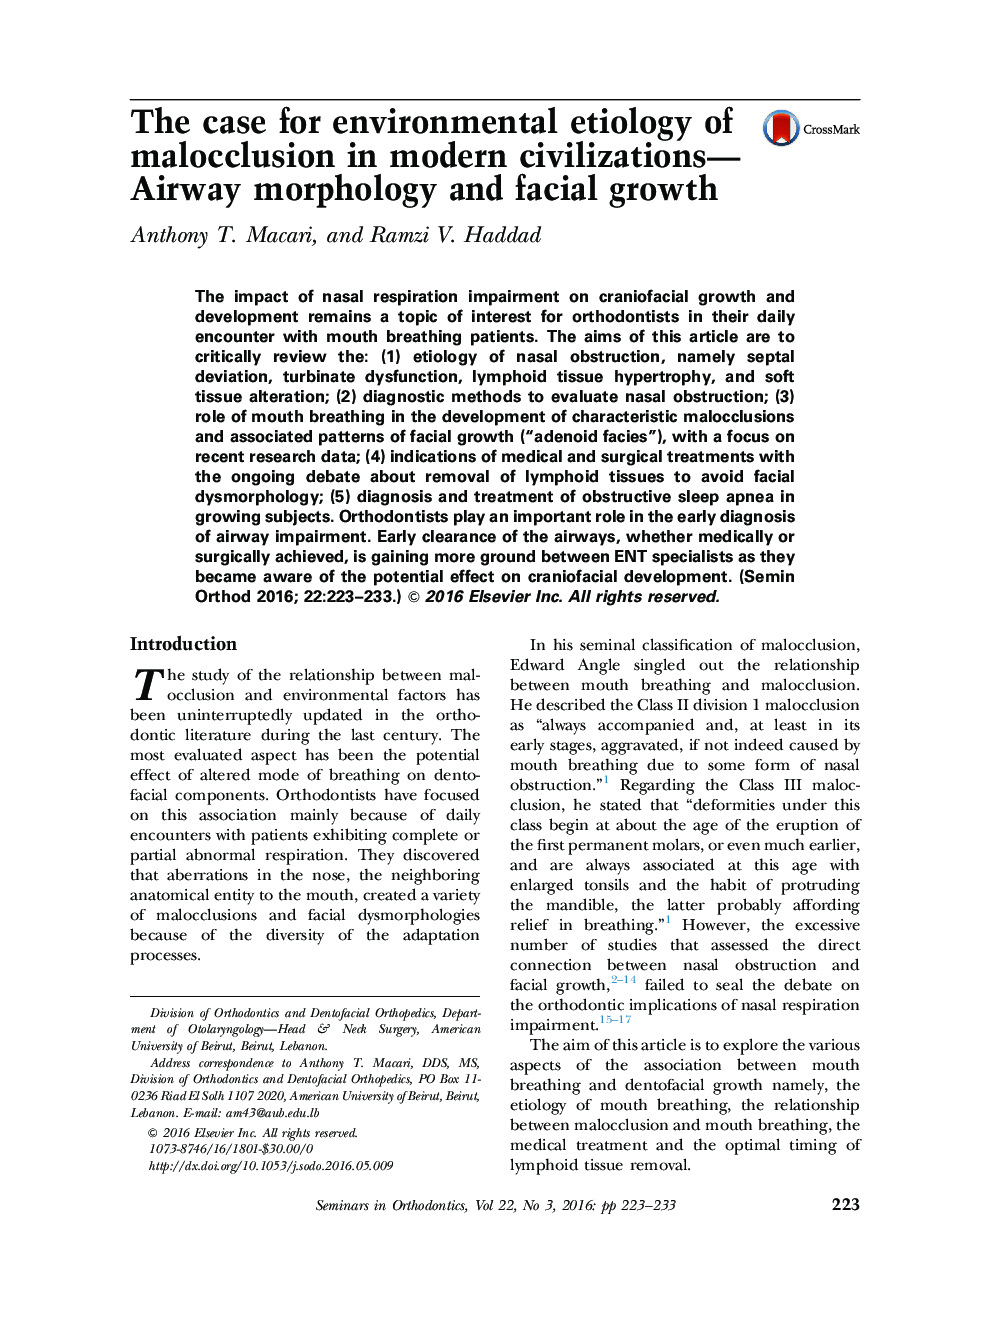 The case for environmental etiology of malocclusion in modern civilizations—Airway morphology and facial growth